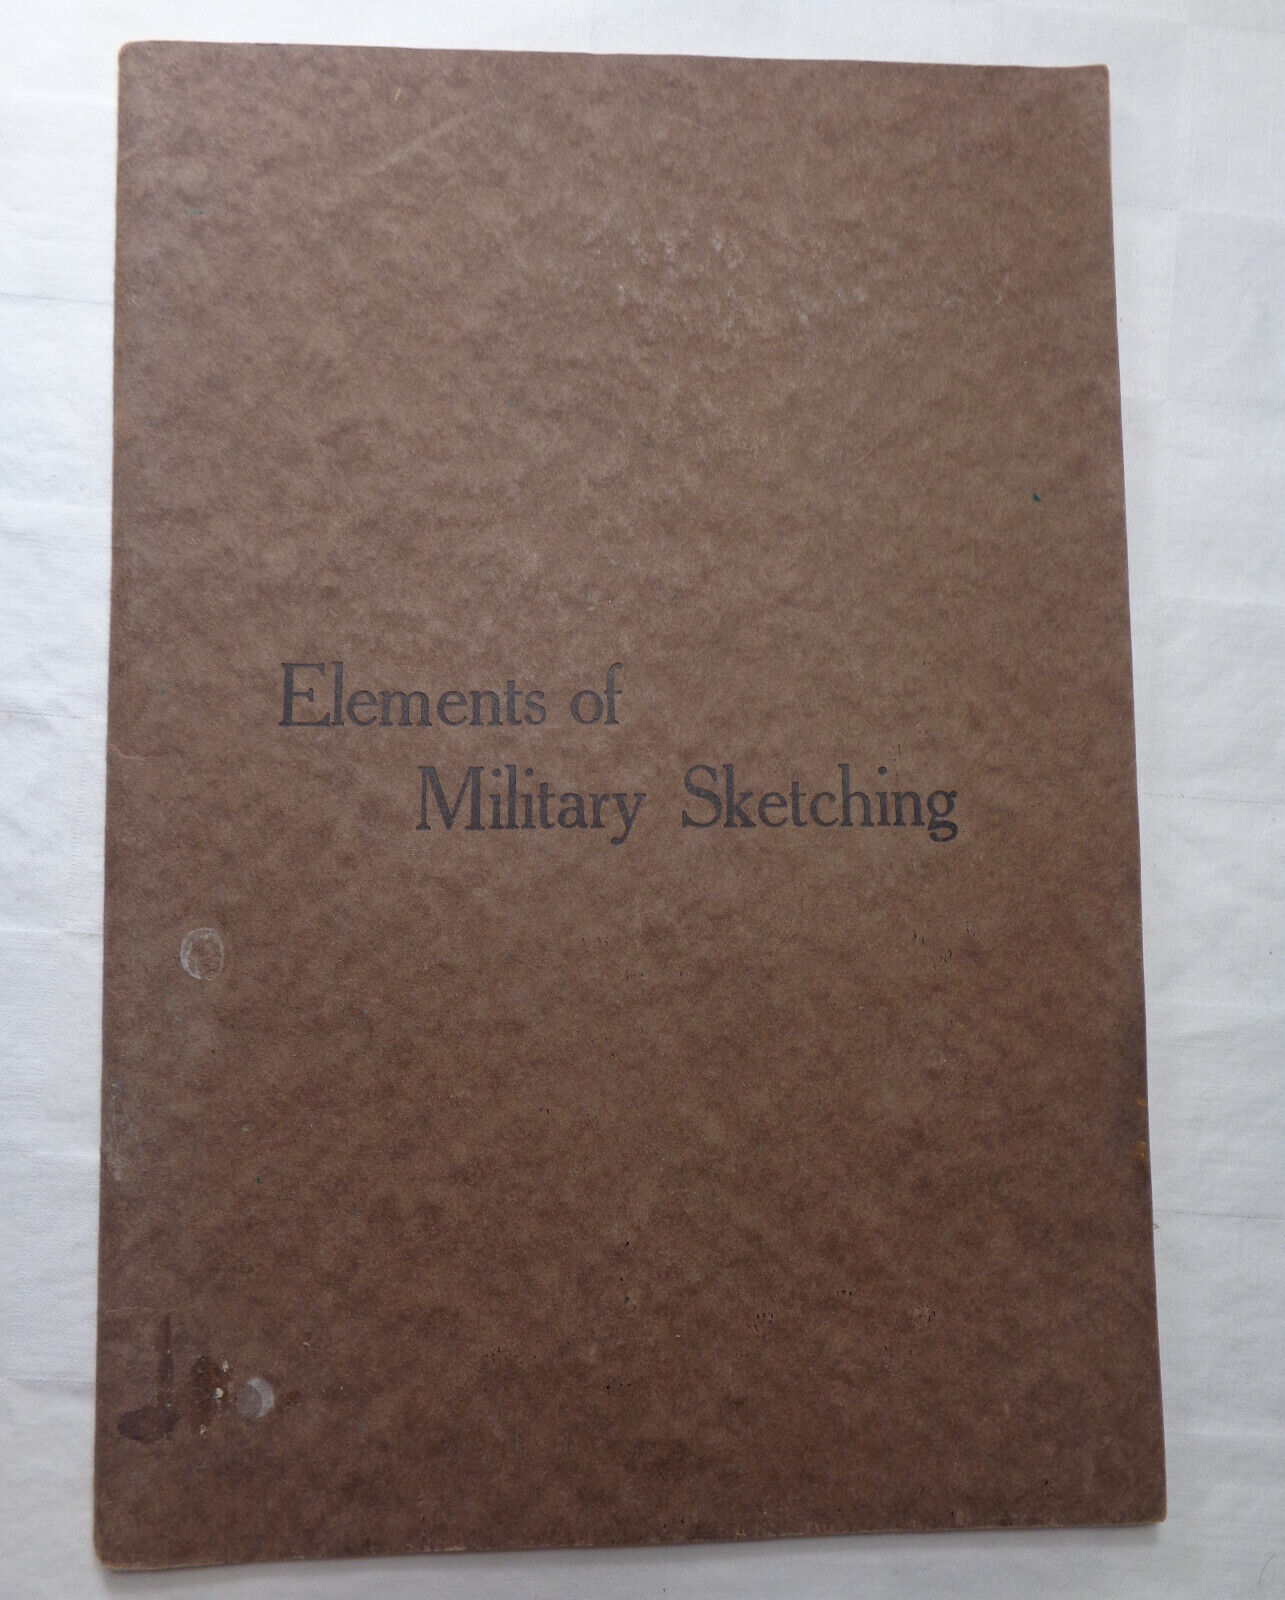 RARE 1913 Elements of Military Sketching 2nd Edition Ltd to 4000 Ft. Leavenworth